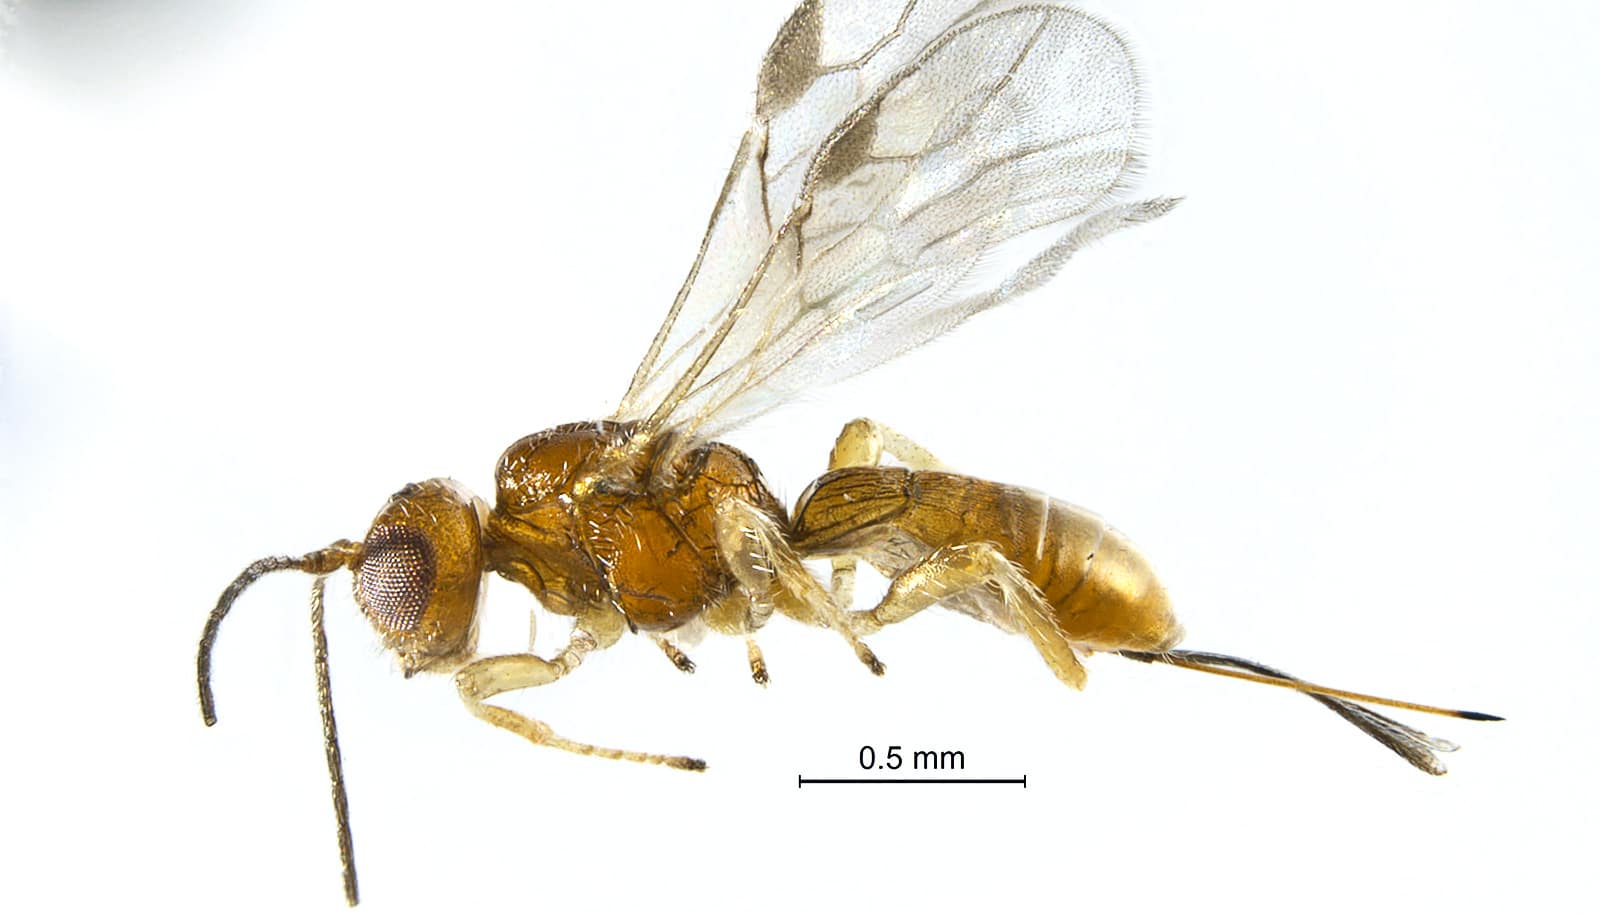 Allorhogas gallifolia is a new species of wasp discovered in live oak trees. First collected in 2014 by students in the lab of Rice evolutionary biologist Scott Egan, A. gallifolia is one of four new wasp species described in the study. (Credit: Ernesto Samacá-Sáenz/UNAM)